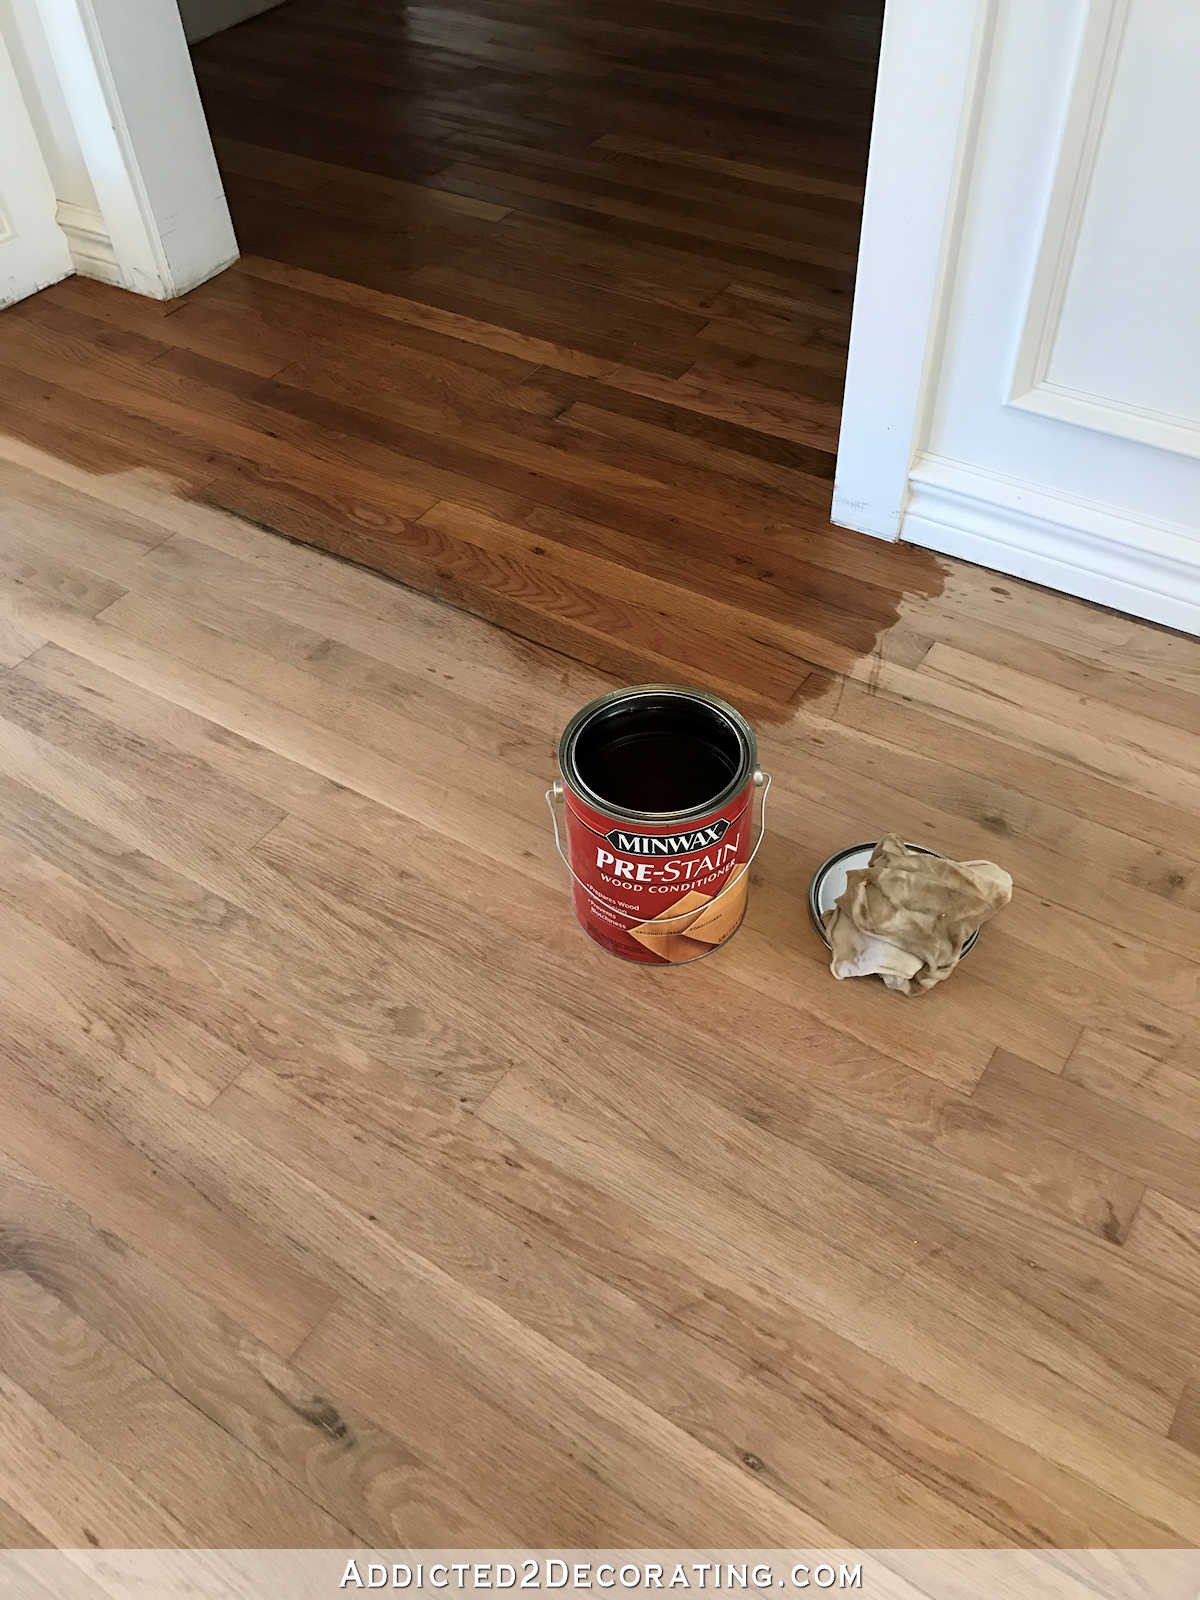 grey hardwood floors kitchen of adventures in staining my red oak hardwood floors products process within staining red oak hardwood floors 1 conditioning the wood with minwax pre stain